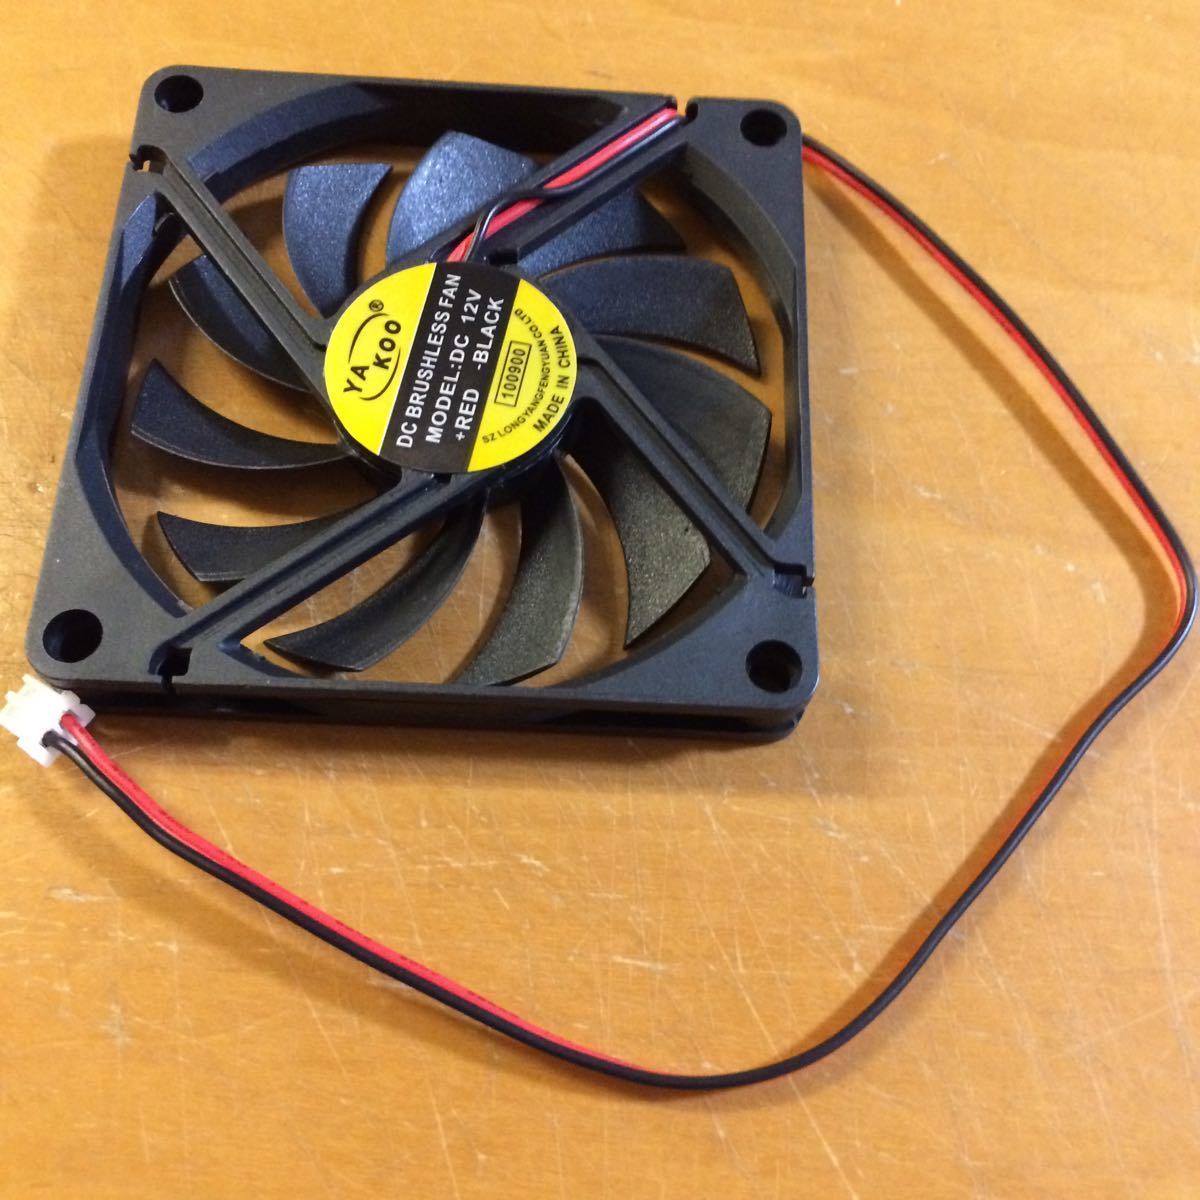  free shipping! DC 12V fan 8cm ( warmth 1cm) brushless motor quiet sound type all sorts cooling .! cooling fan FAN